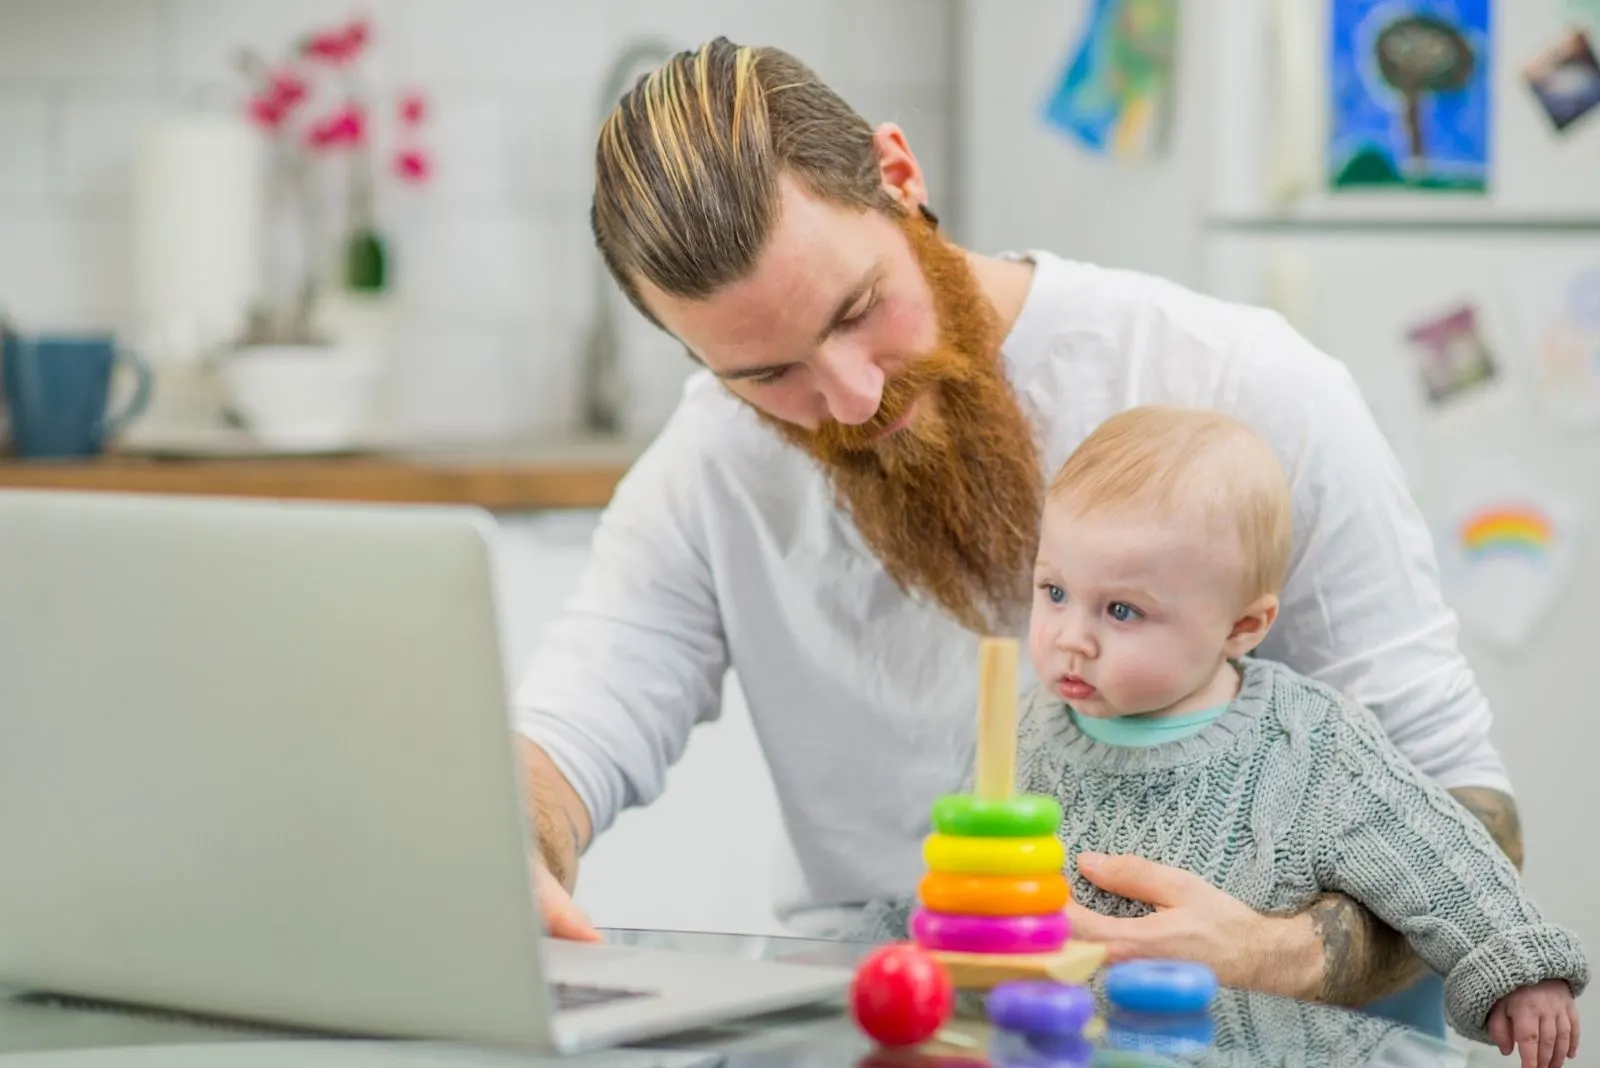 a young caucasian father working on his laptop with a baby on his lap and toys on the table